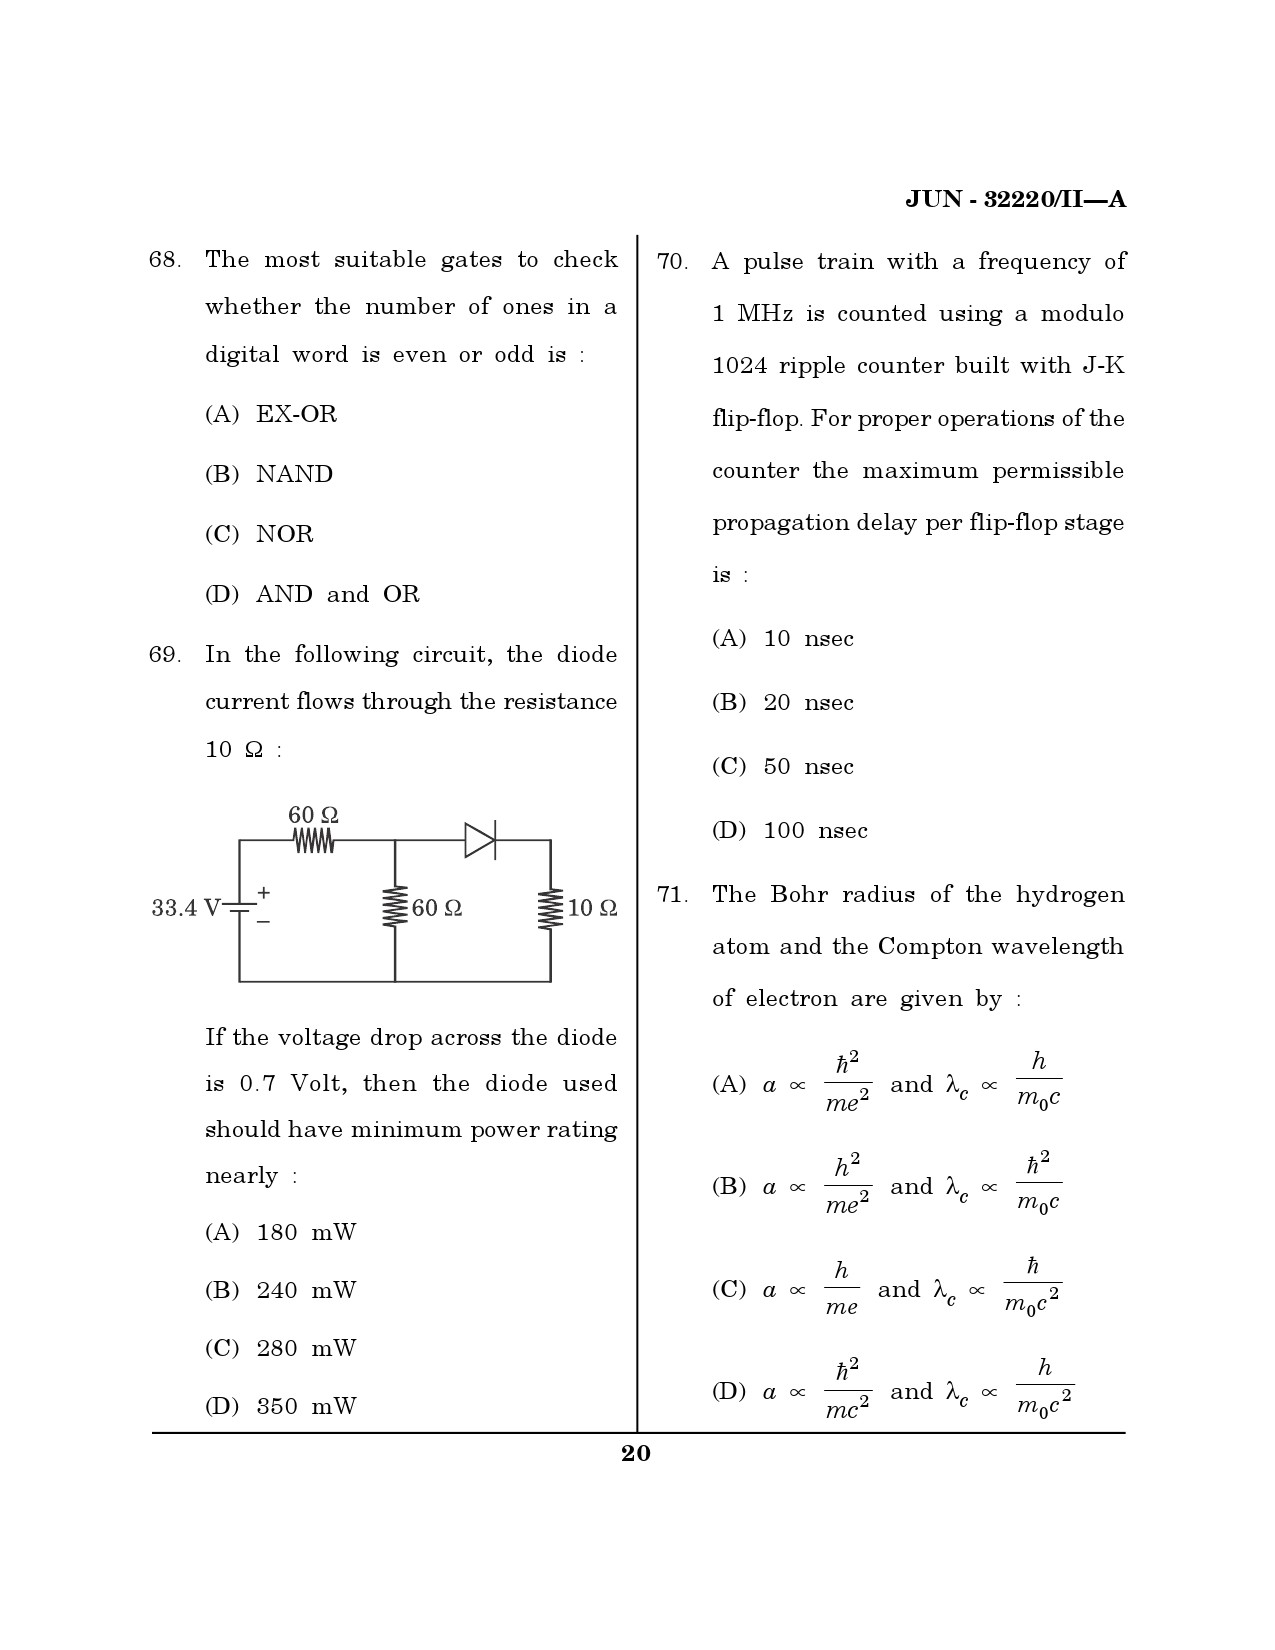 Maharashtra SET Physical Science Question Paper II June 2020 19